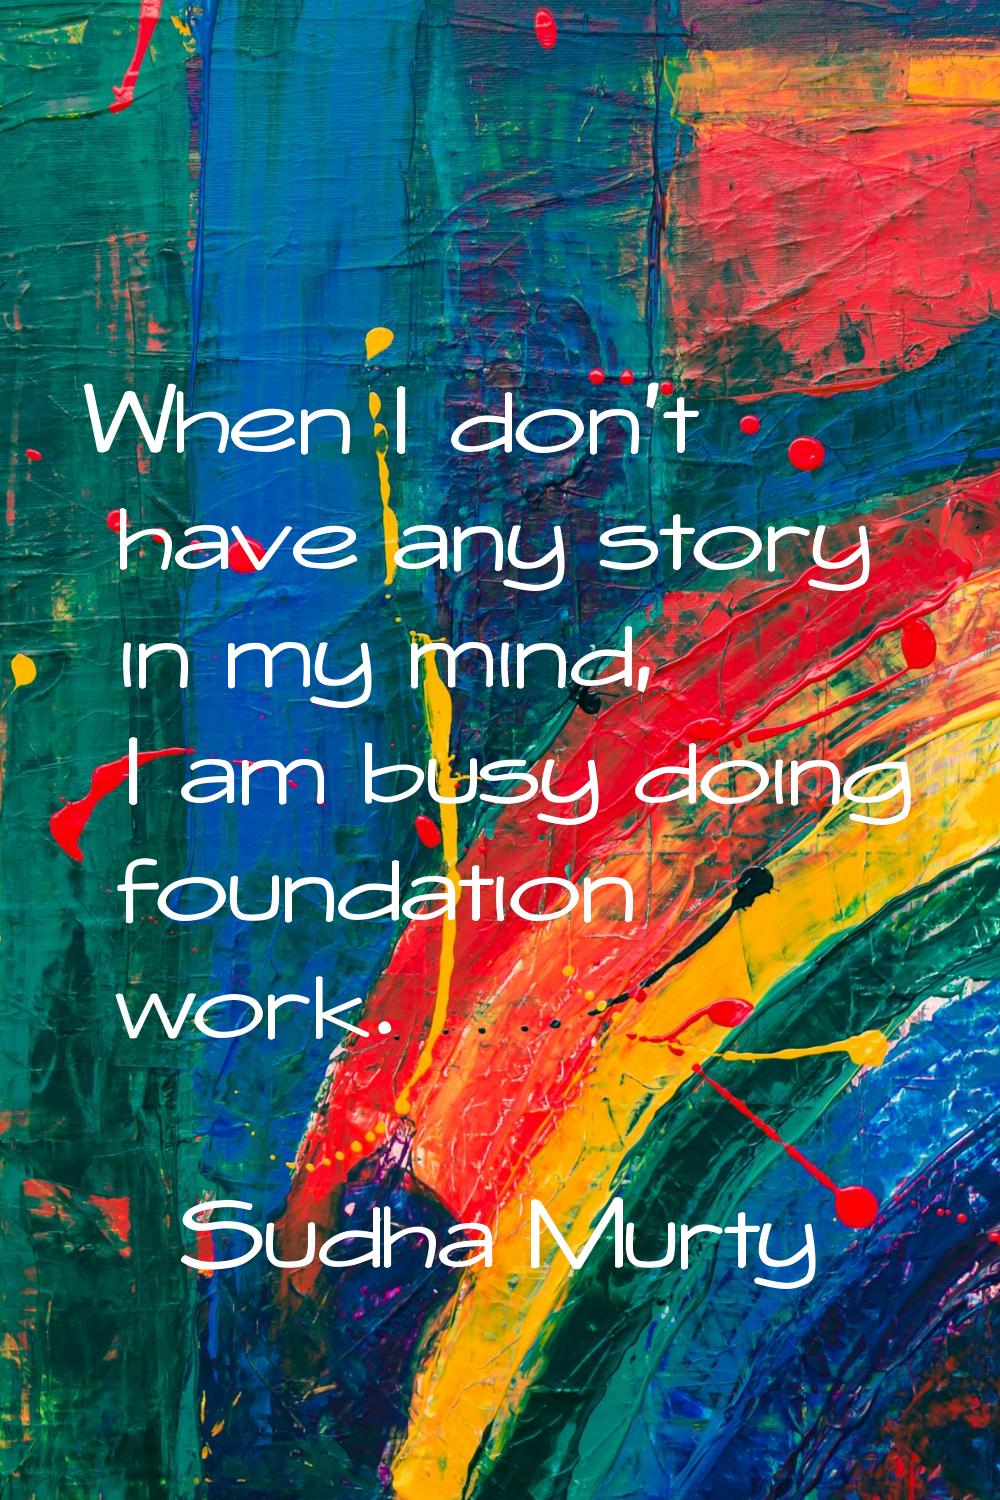 When I don't have any story in my mind, I am busy doing foundation work.